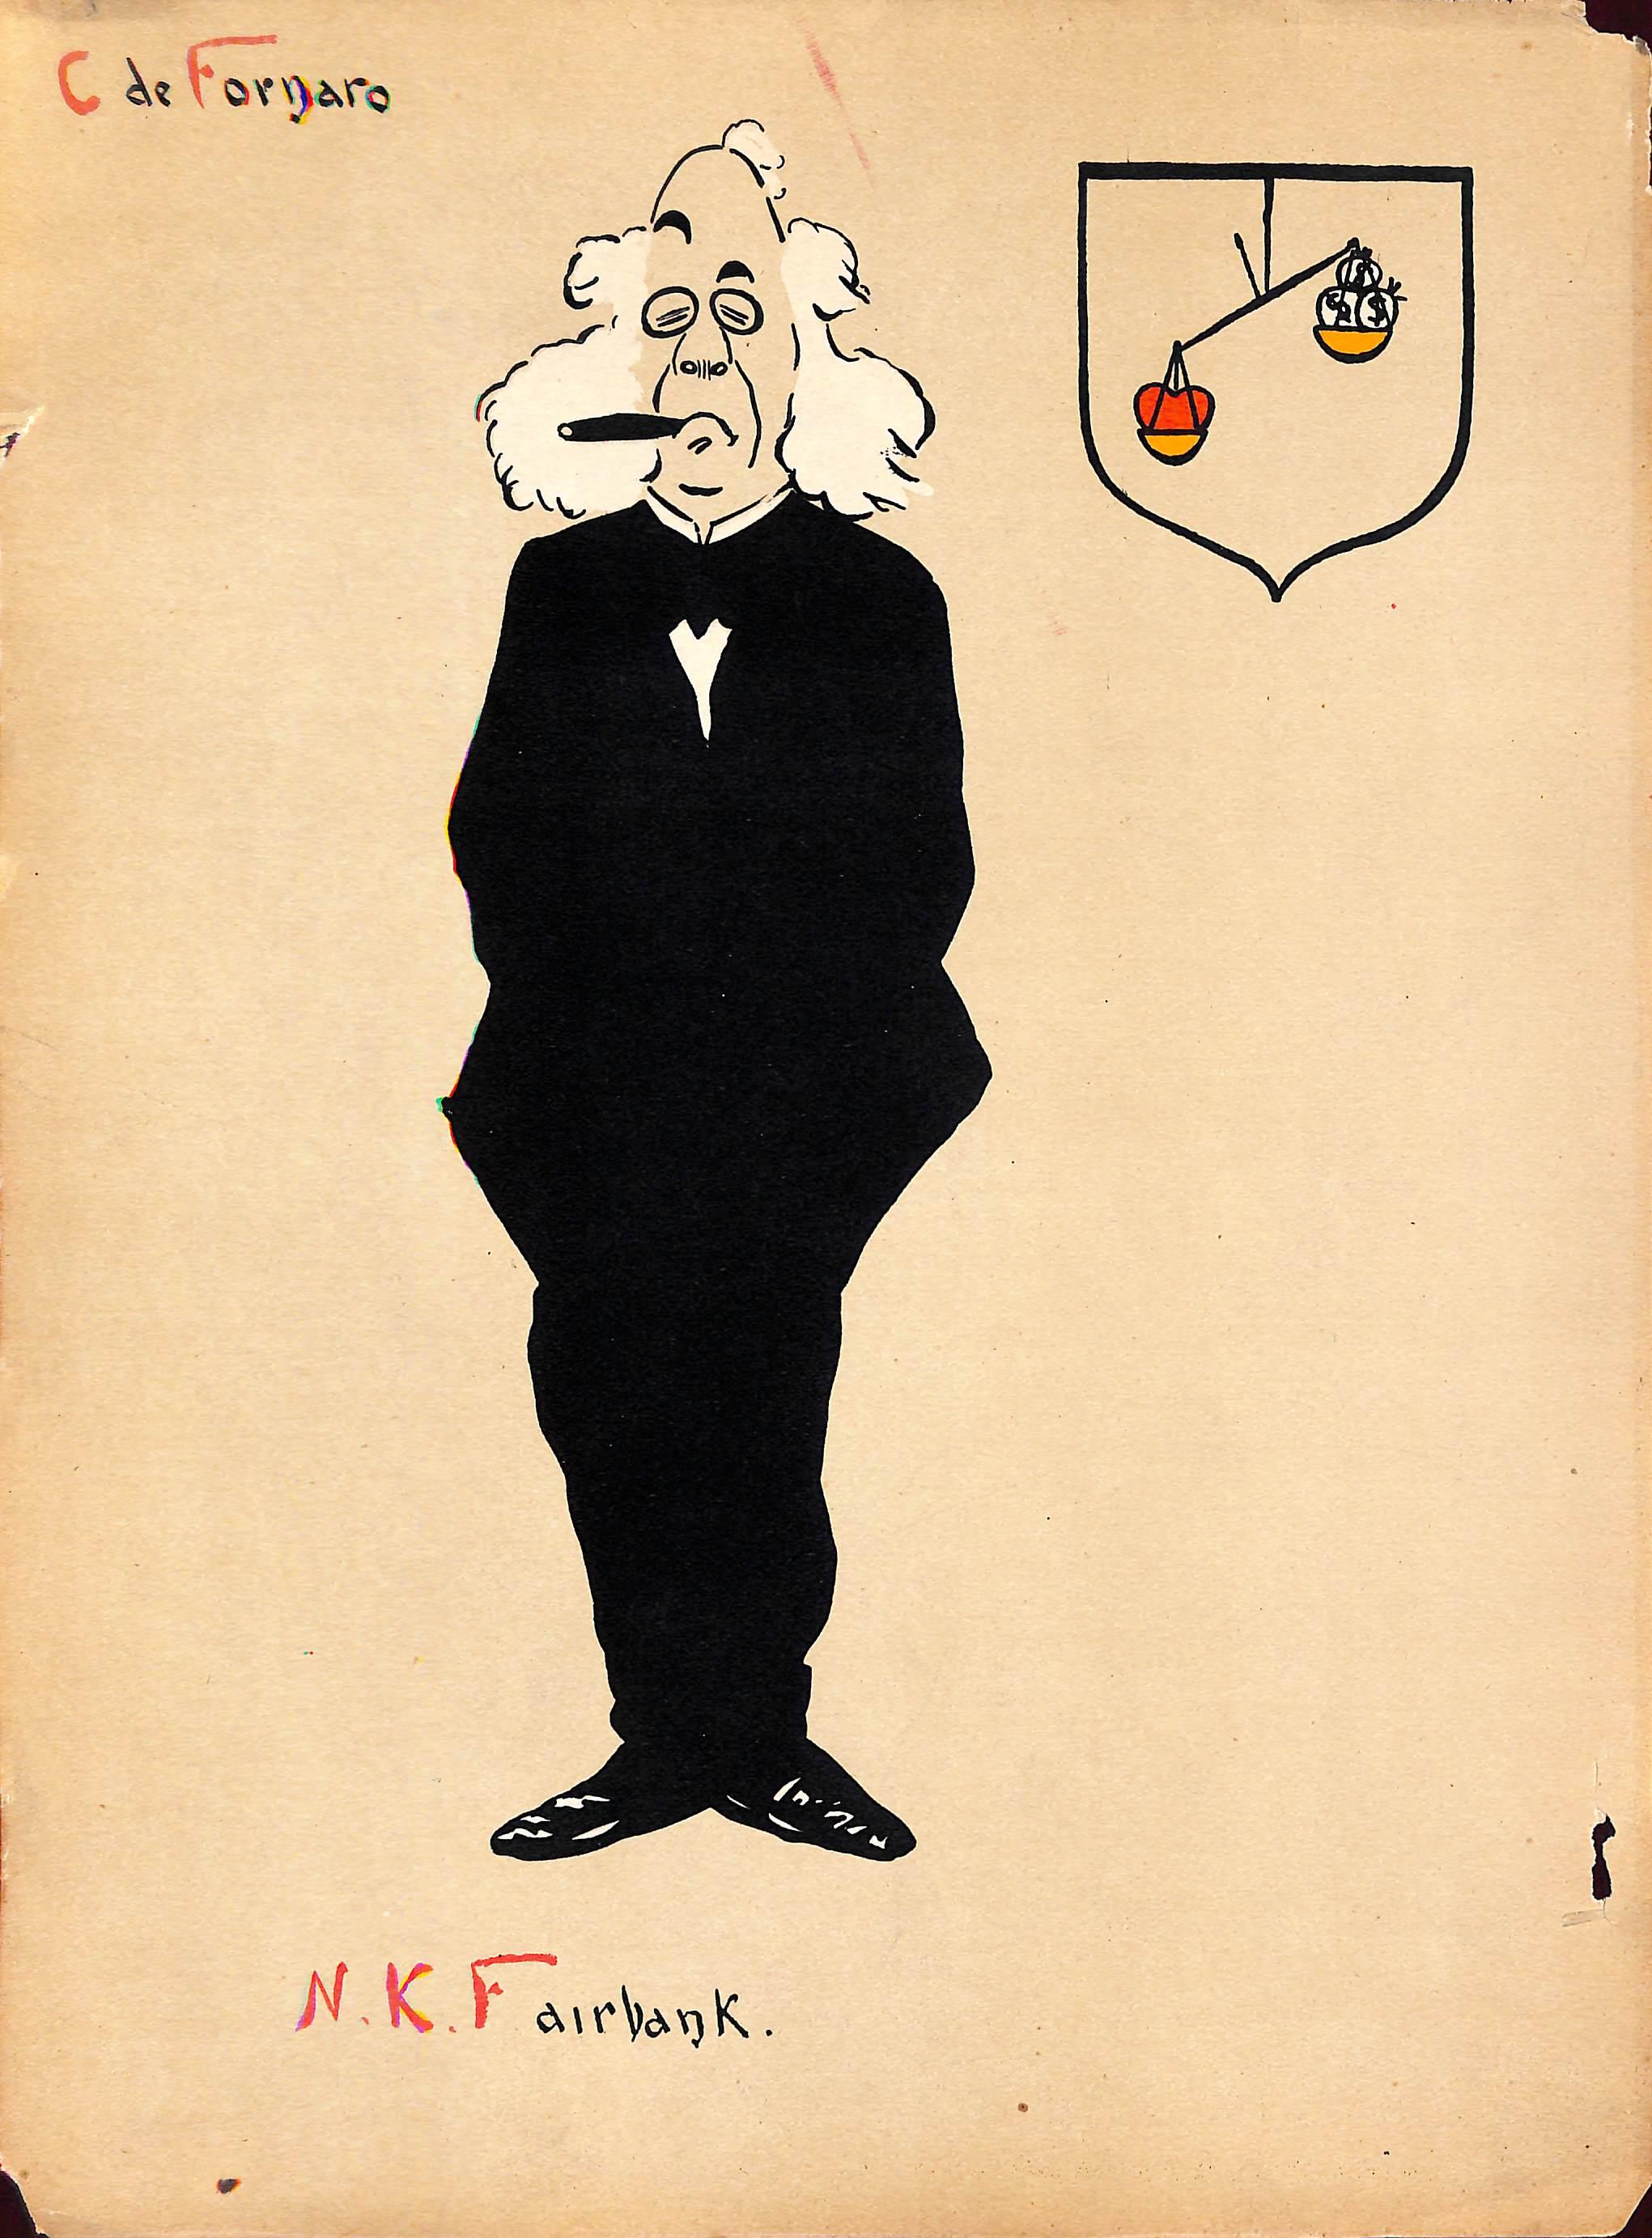 Art Sz: 13 3/4"H x 10 1/4"W

Carlo de Fornaro (sometimes spelled Carlo di Fornaro) (1872–1949) was an artist, caricaturist, writer, humorist, and revolutionary.

His work is in the collection of the US National Gallery of Art and Harvard's Fogg Art